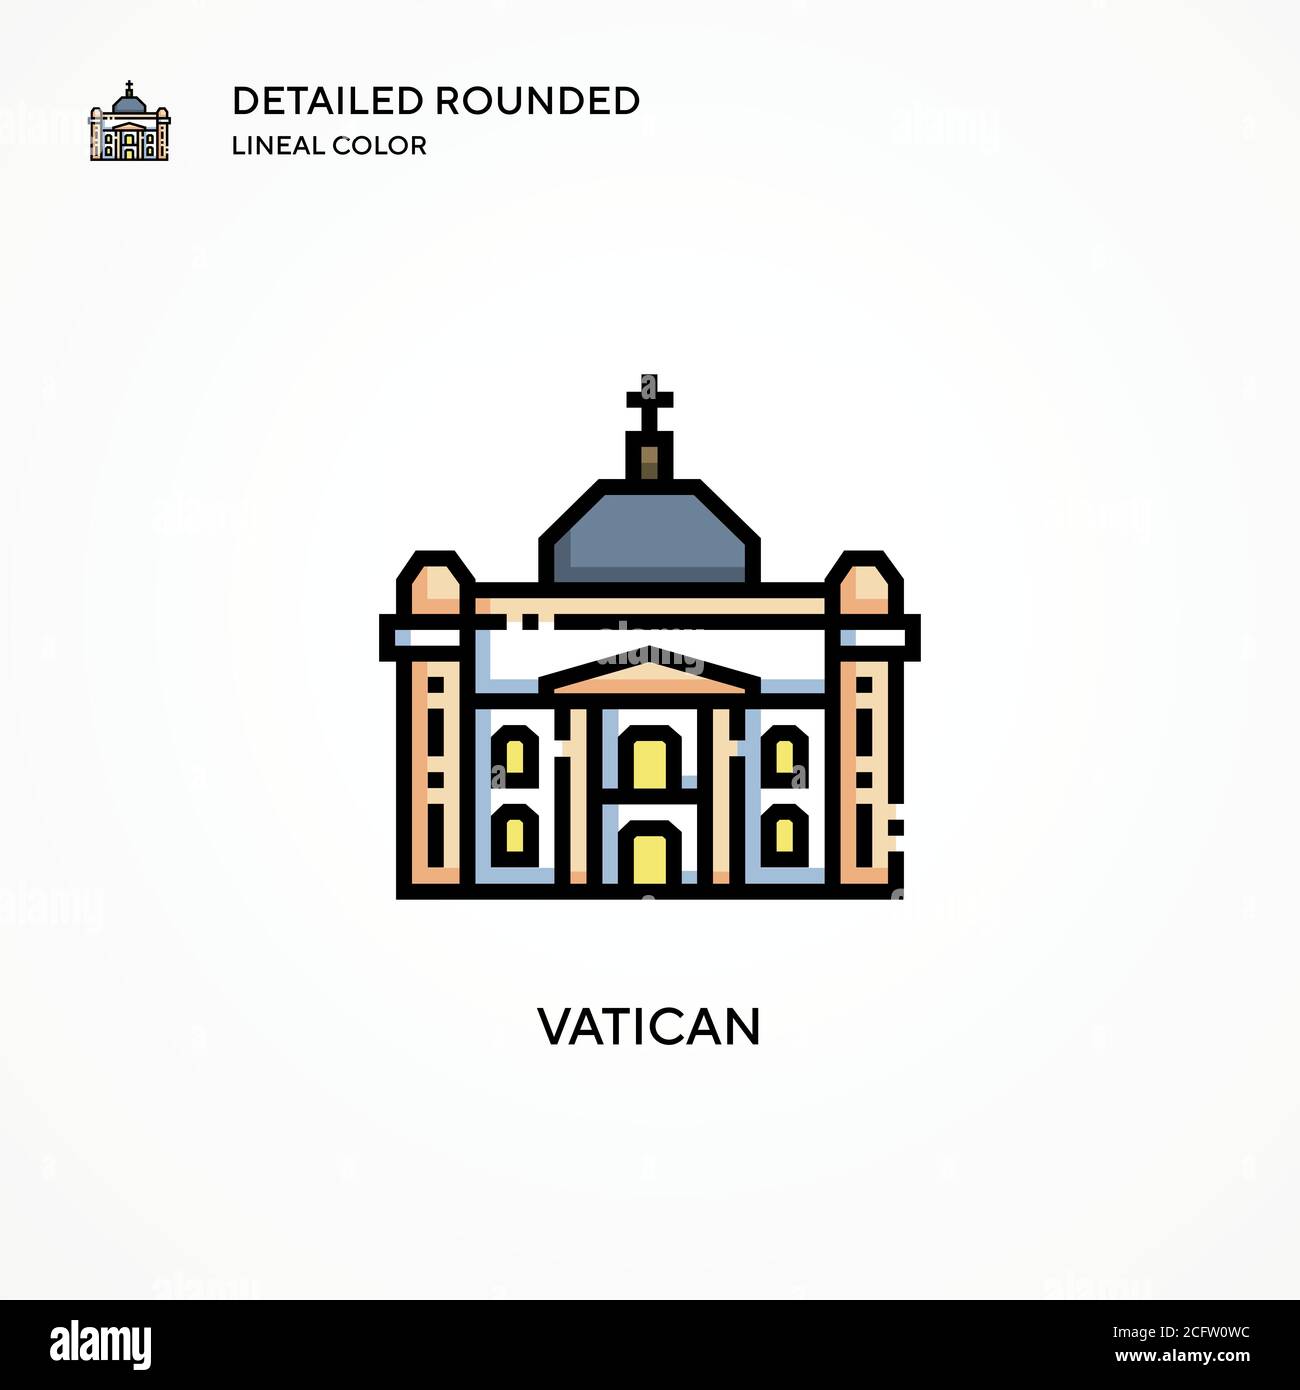 Vatican vector icon. Modern vector illustration concepts. Easy to edit and customize. Stock Vector